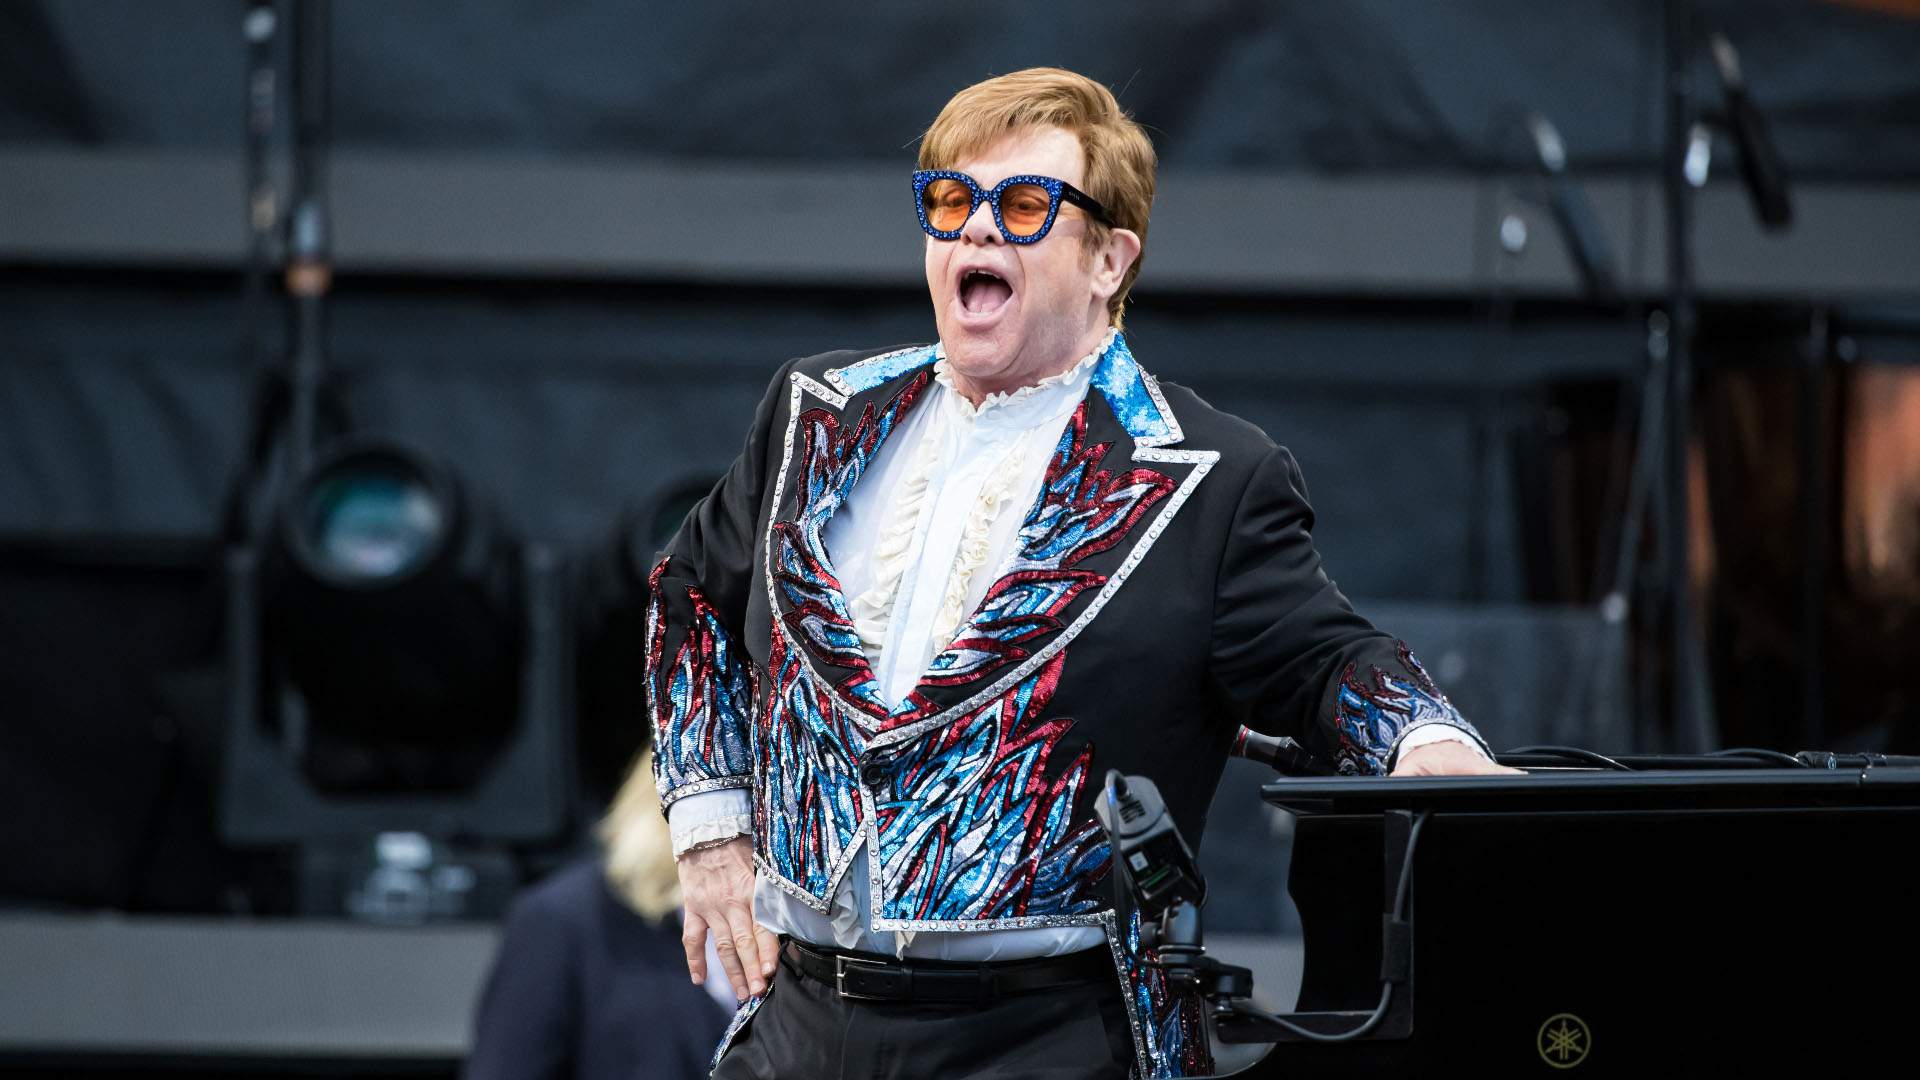 Elton John Is Bringing His Final Tour Down Under Again in 2023 for a Last Round of Farewell Shows